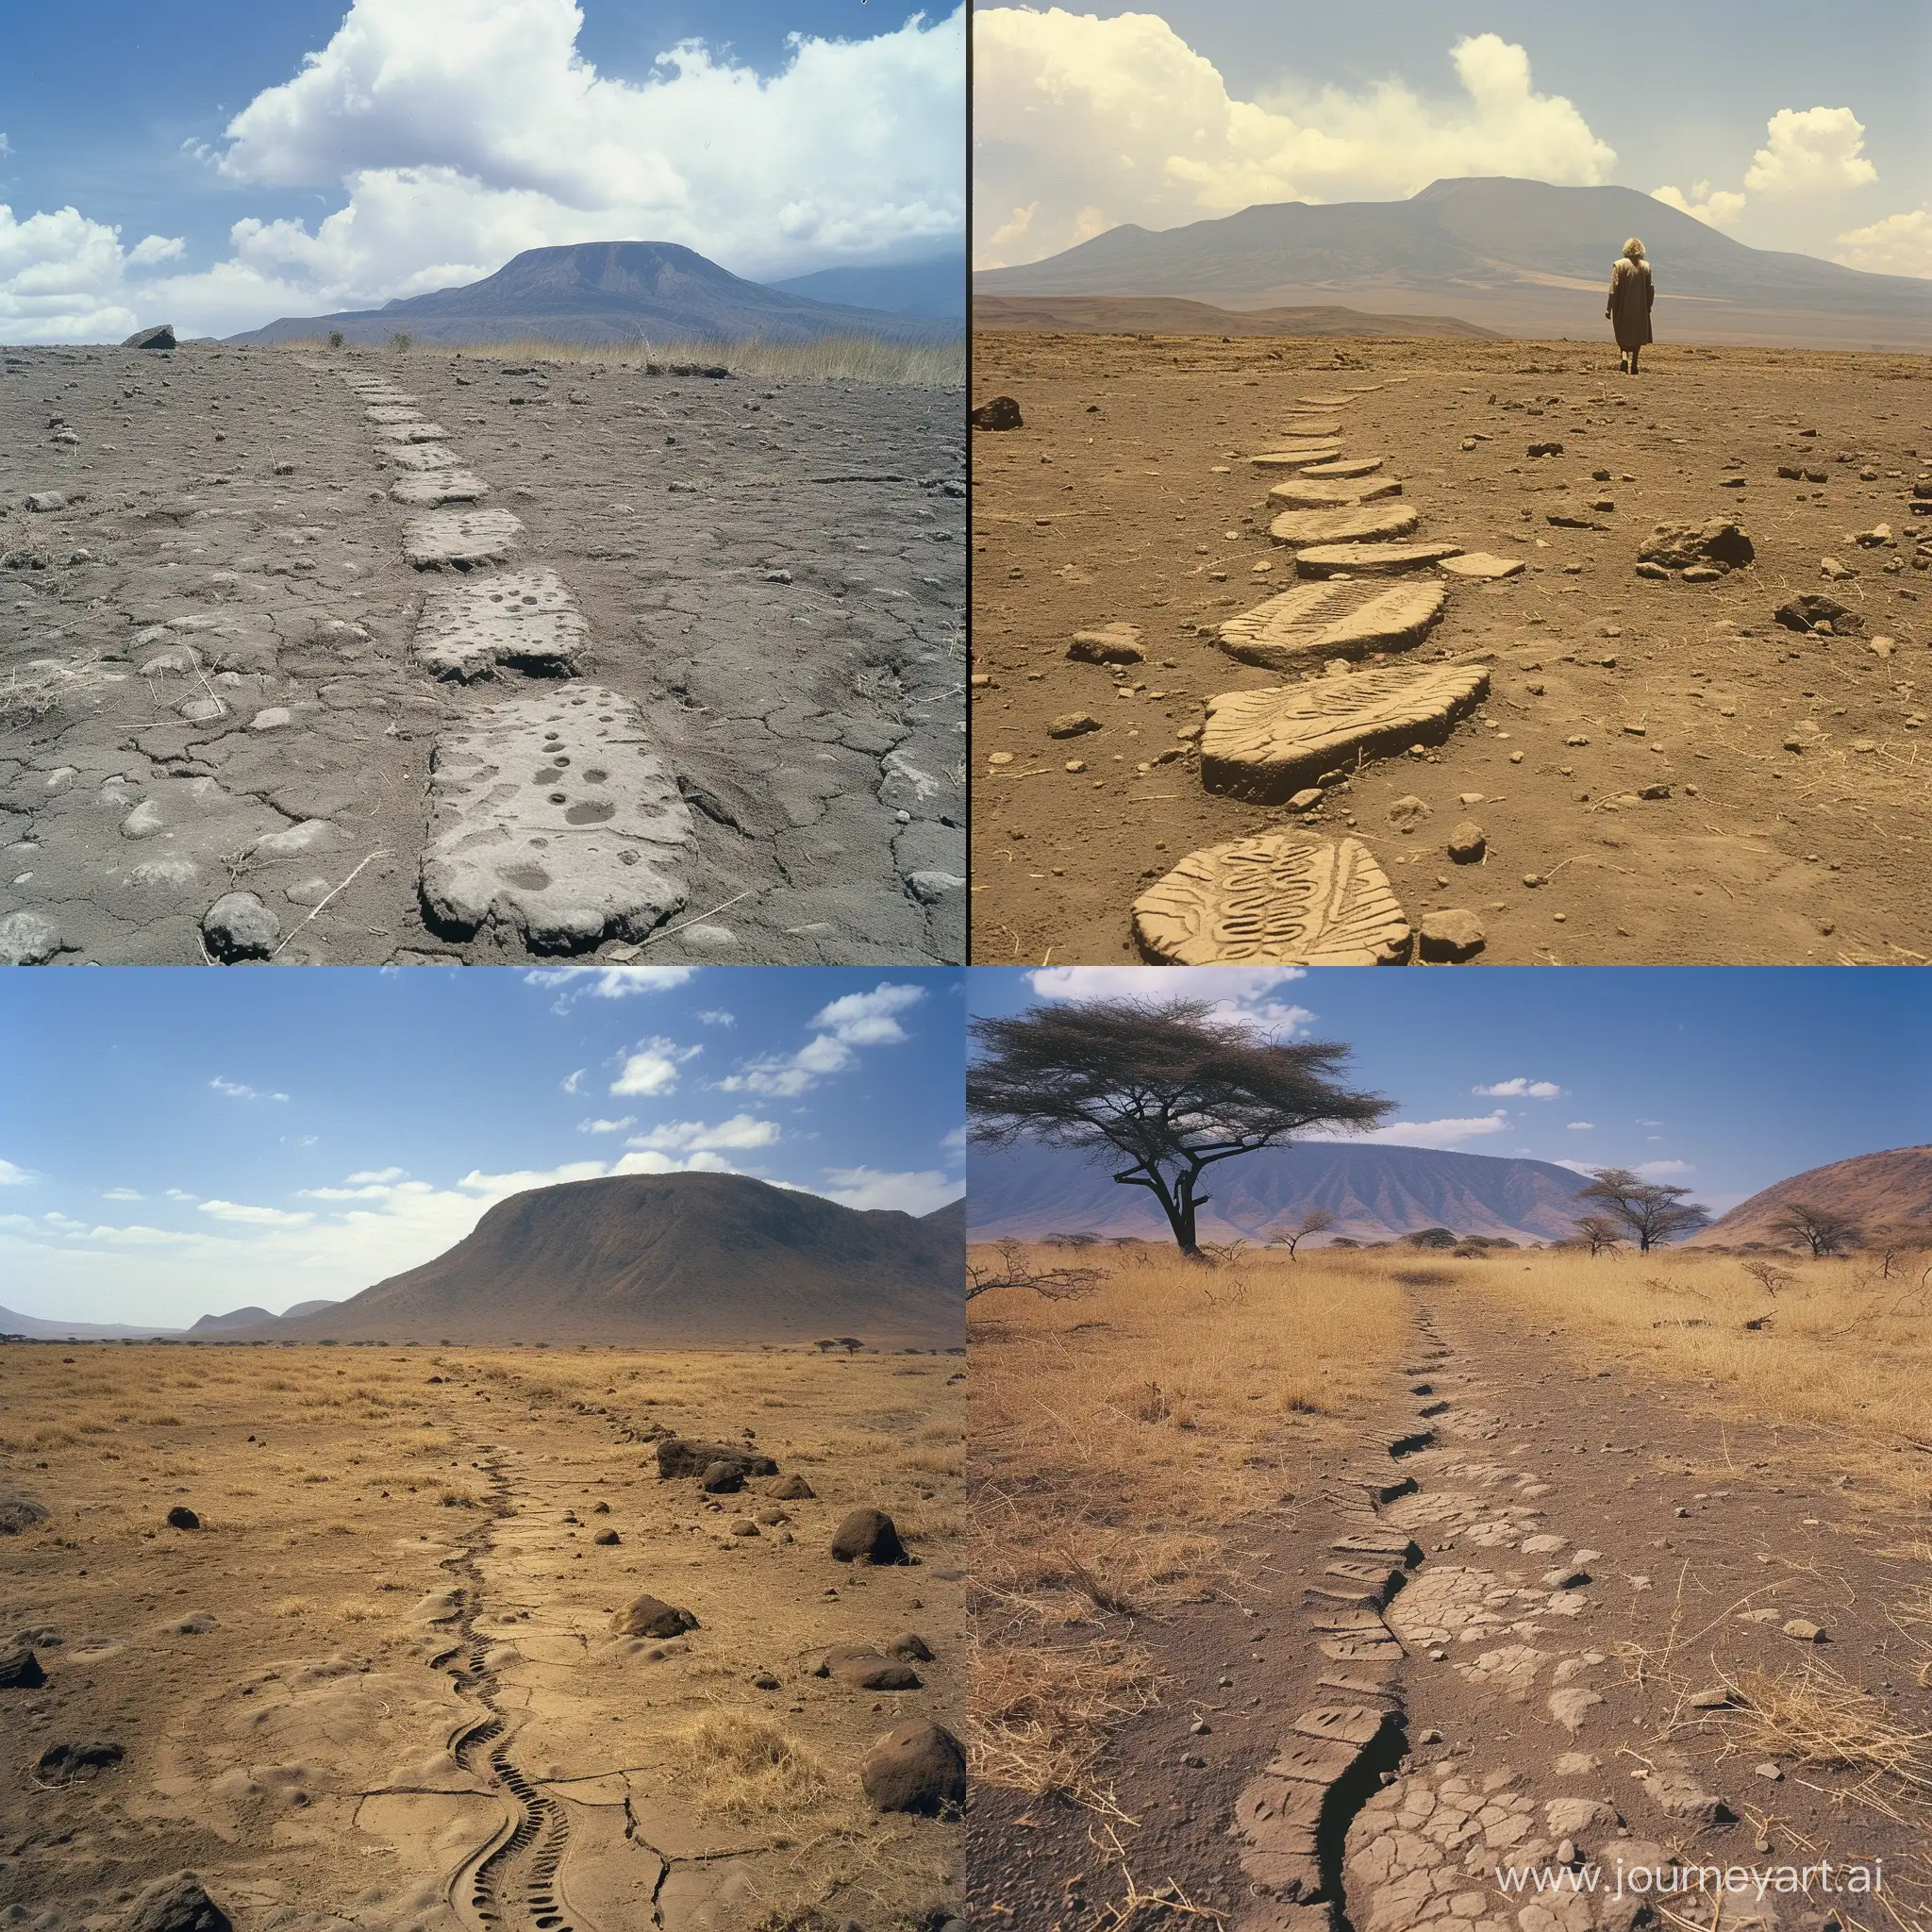 Mary Leakey discovered a 3.5 million year trackway on the dry dusty plains of 
Olduvai Gorge while looking for fossils of human ancestors by a volcano 